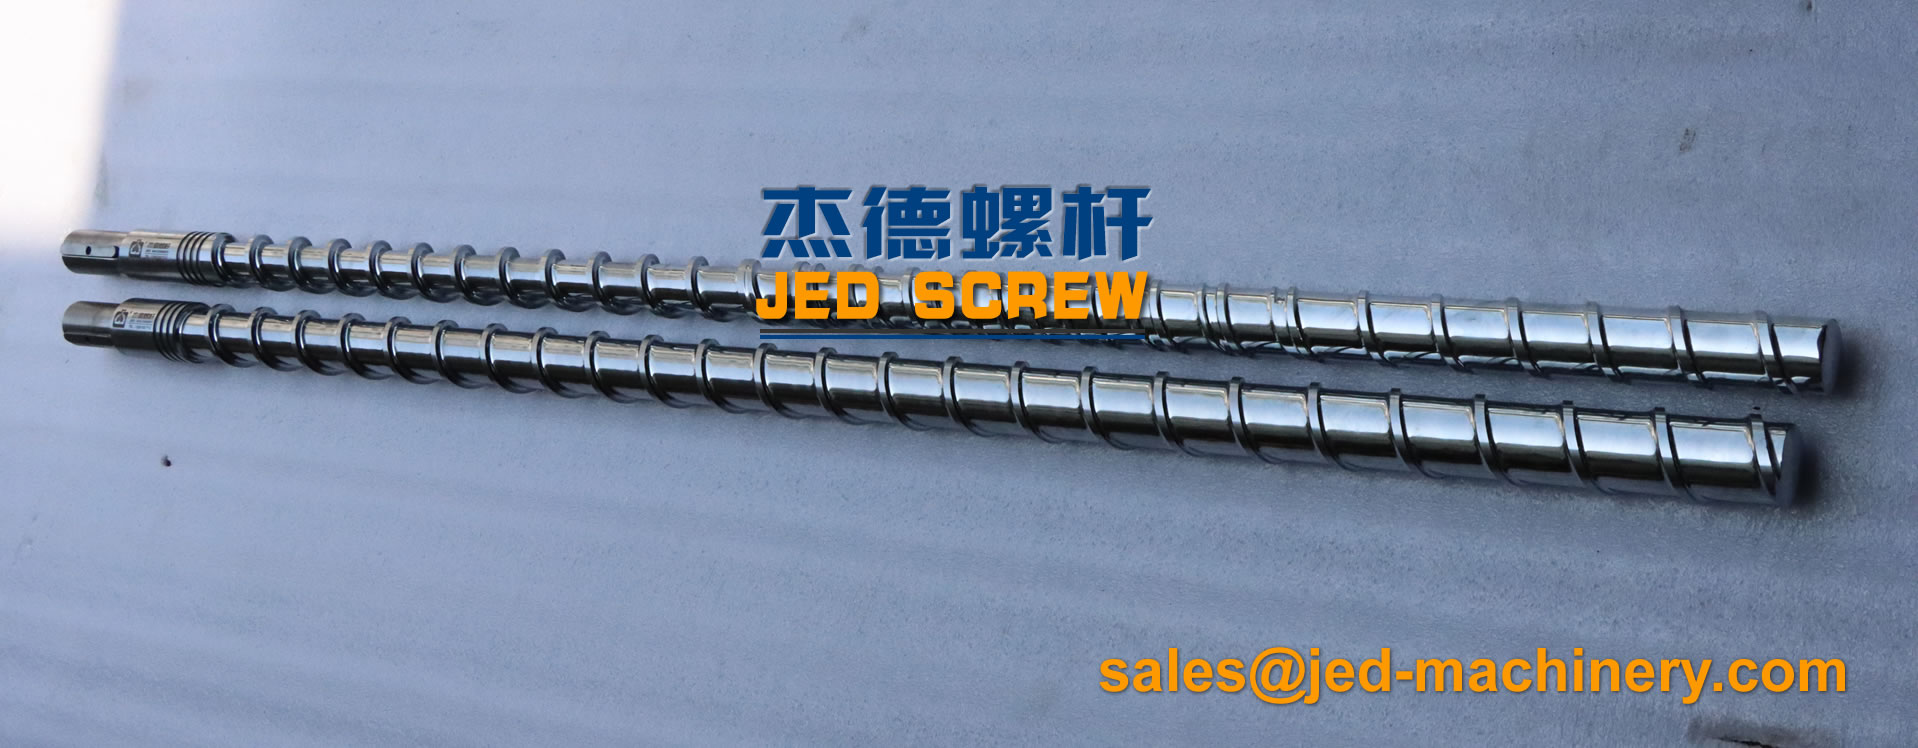 Special Screw for Wire and Cable - SCREW BARREL OF WIRE AND CABLE EXTRUDER - 1